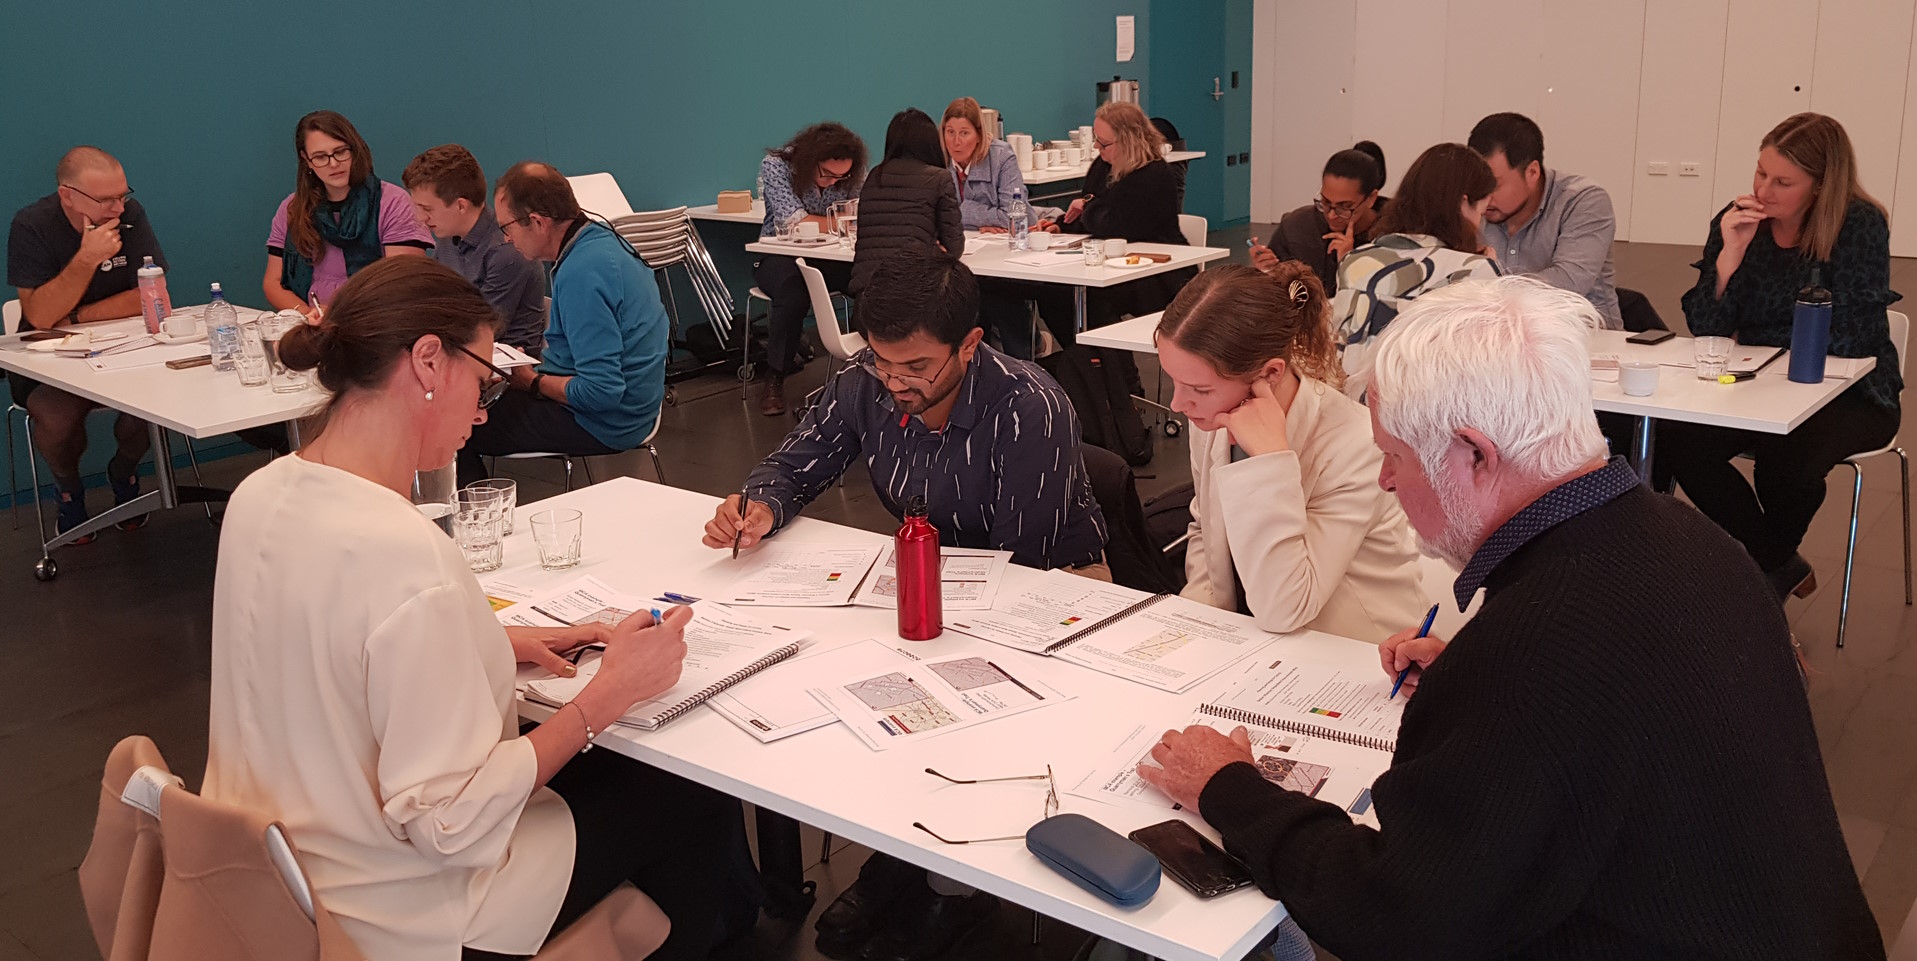 Participants work on an exercise Chch 2023